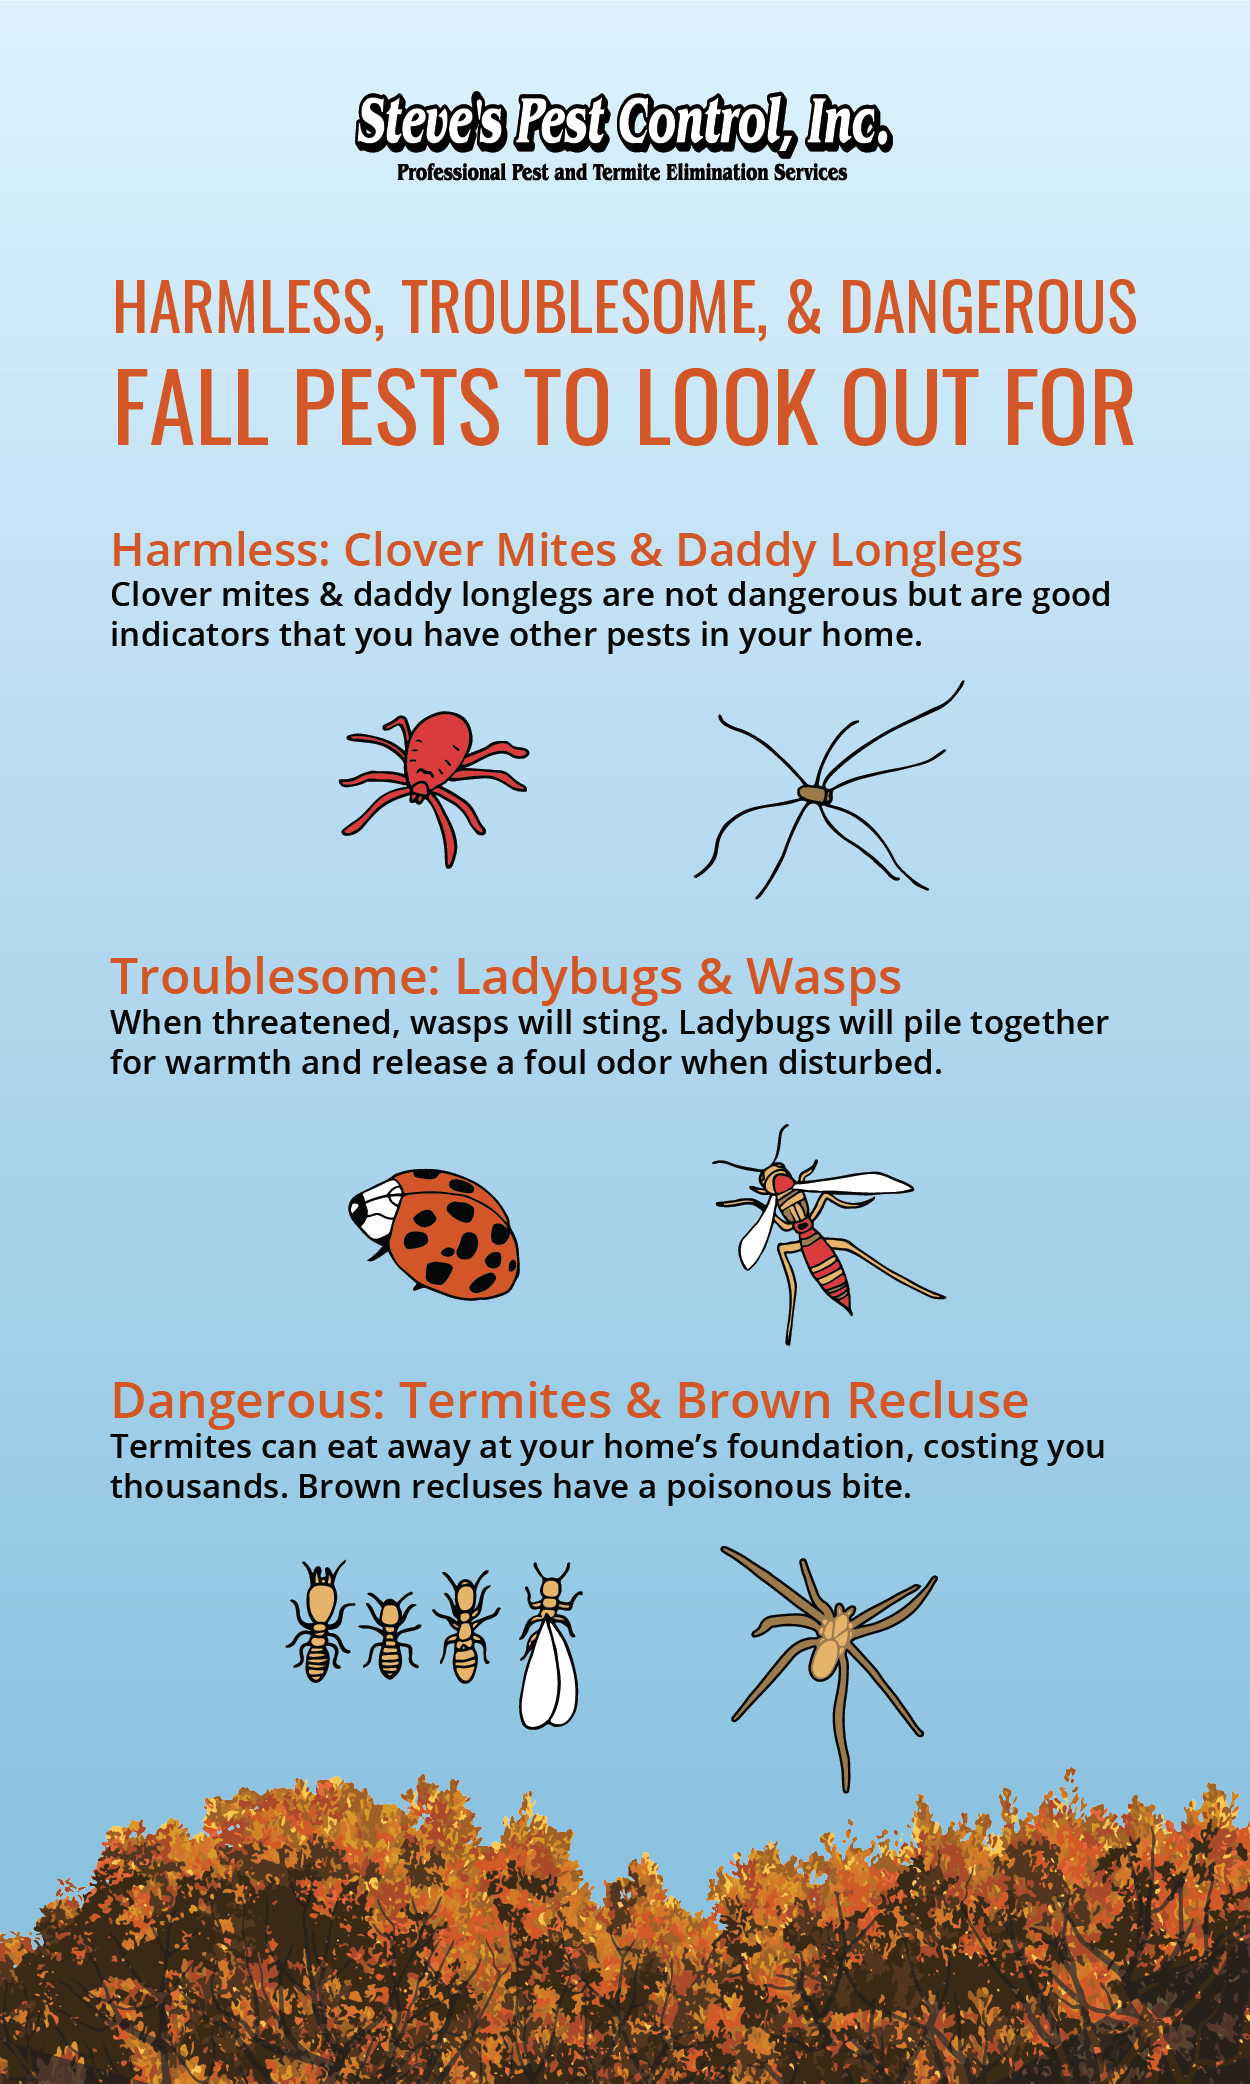 Steve's Pest Control's guide to pests you will commonly see in mid-Missouri this fall.